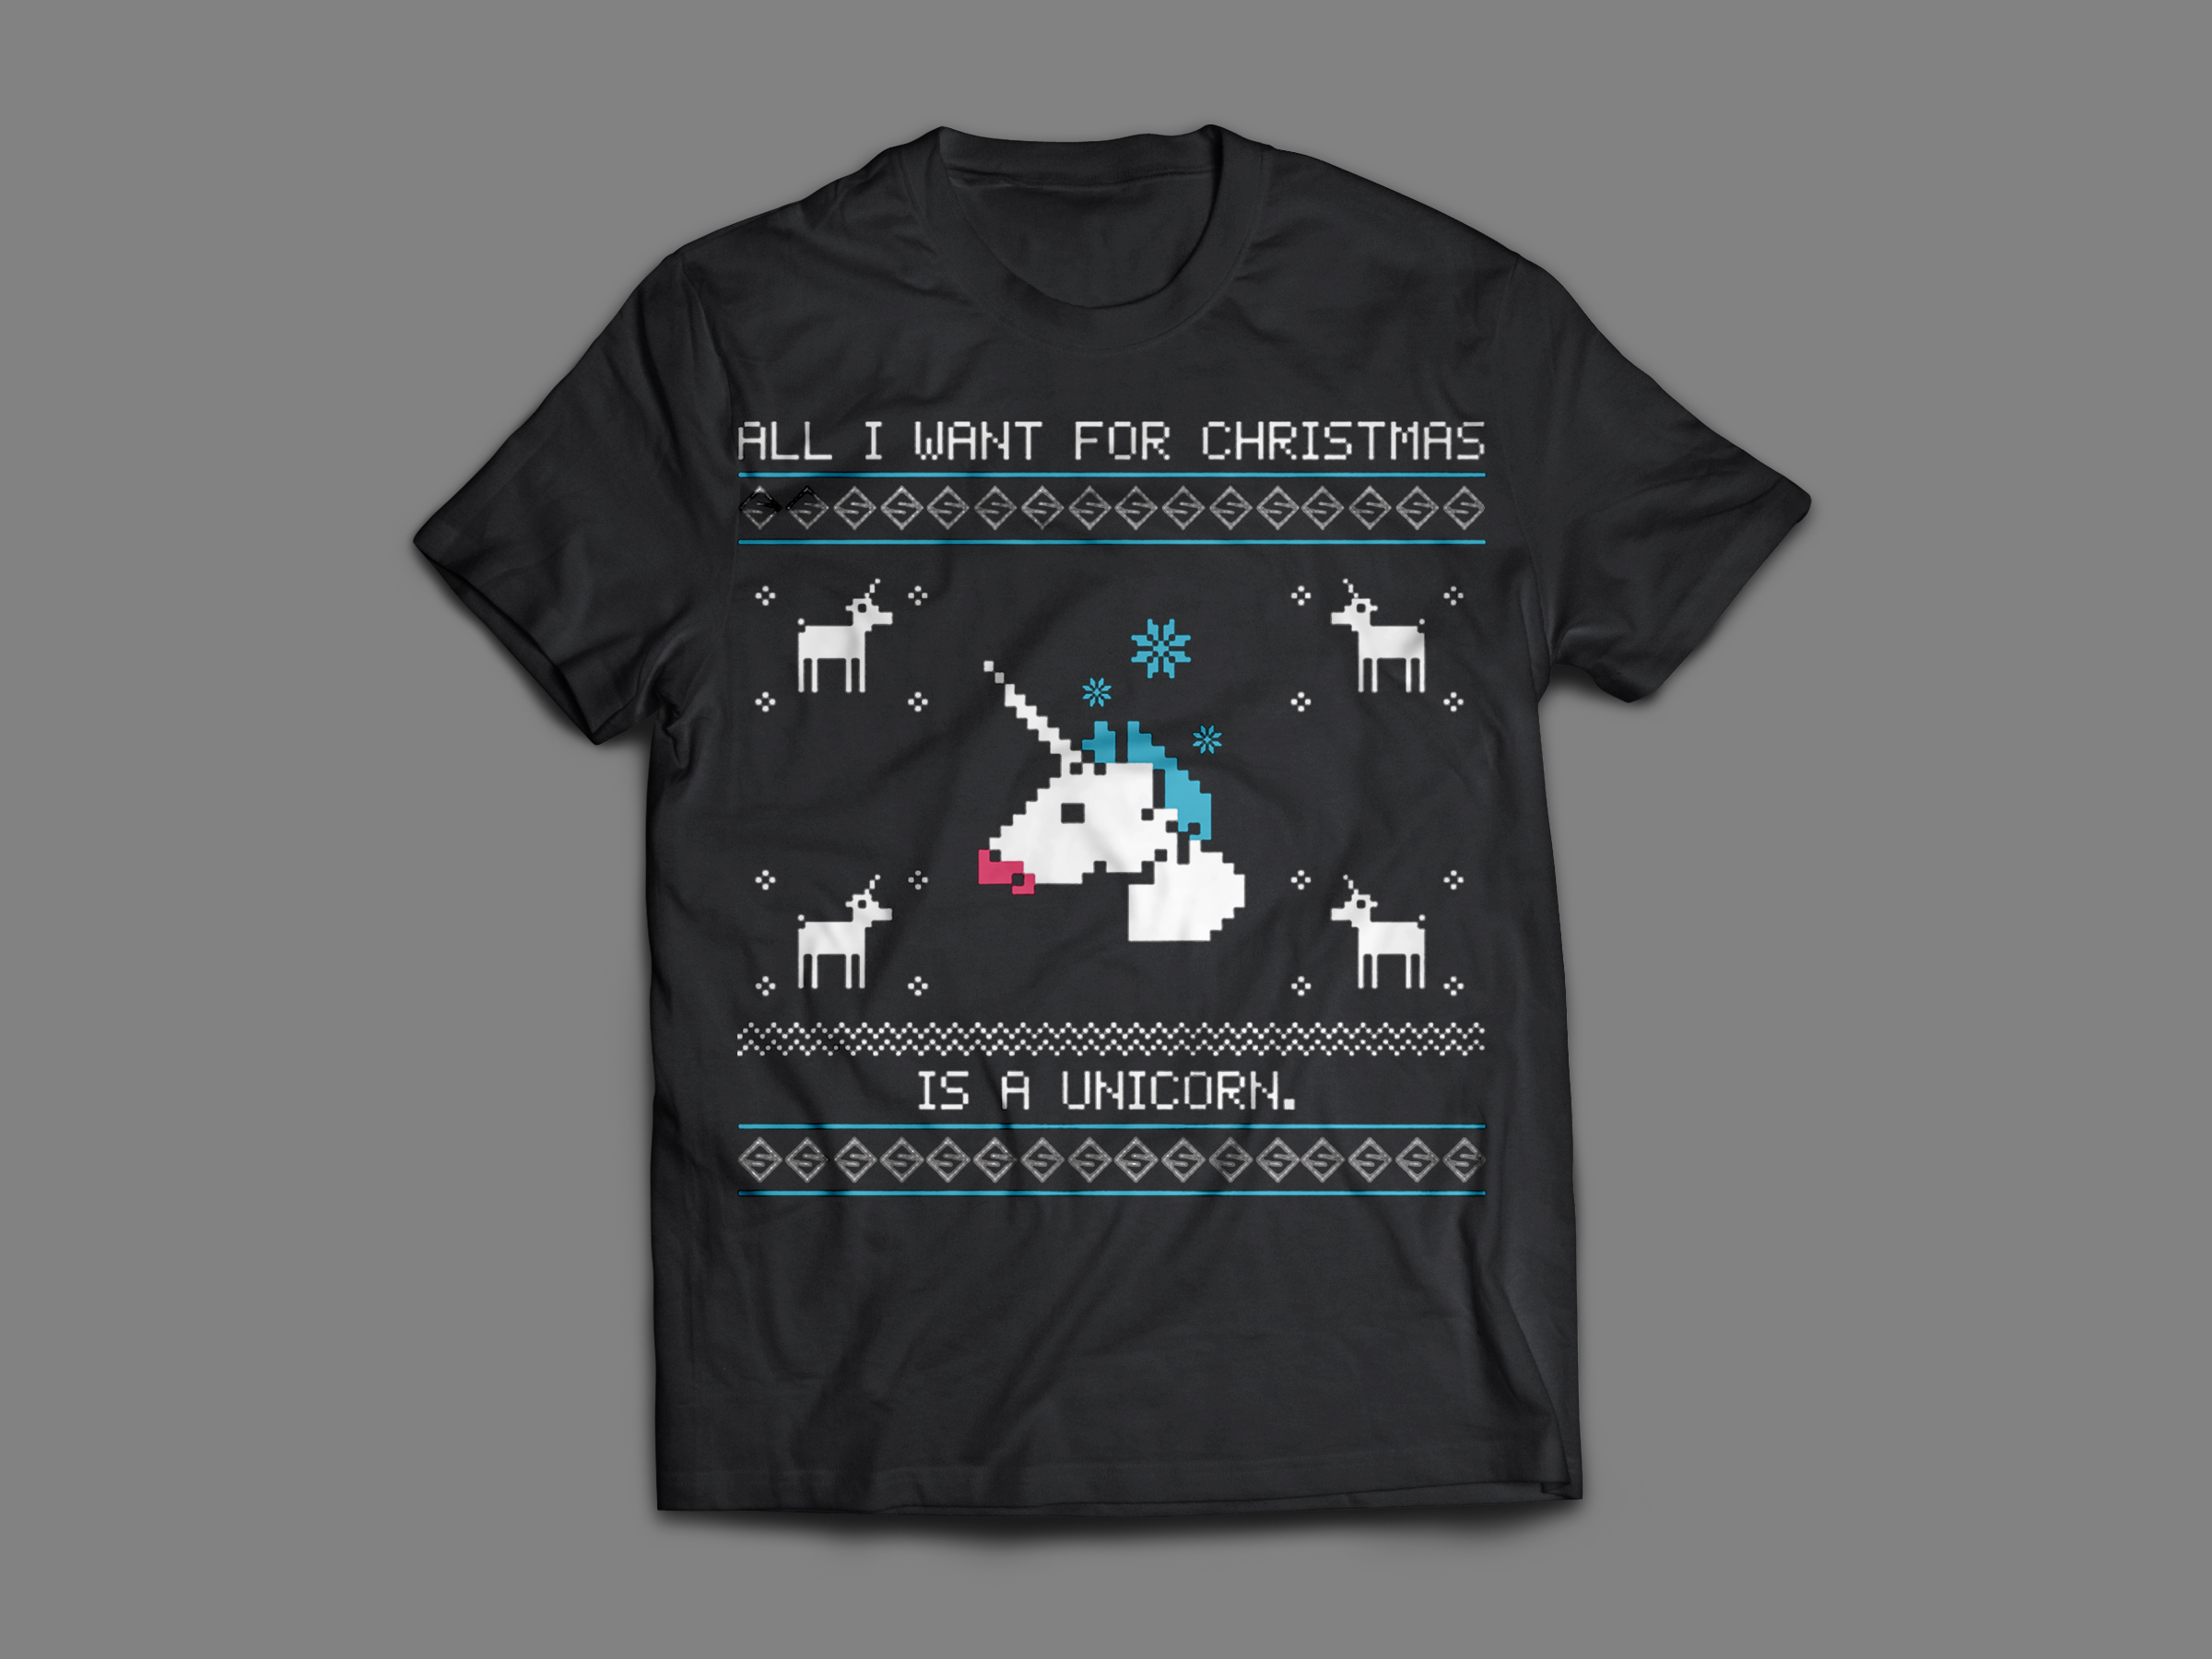 All I Want For Christmas Is A Unicorn v2